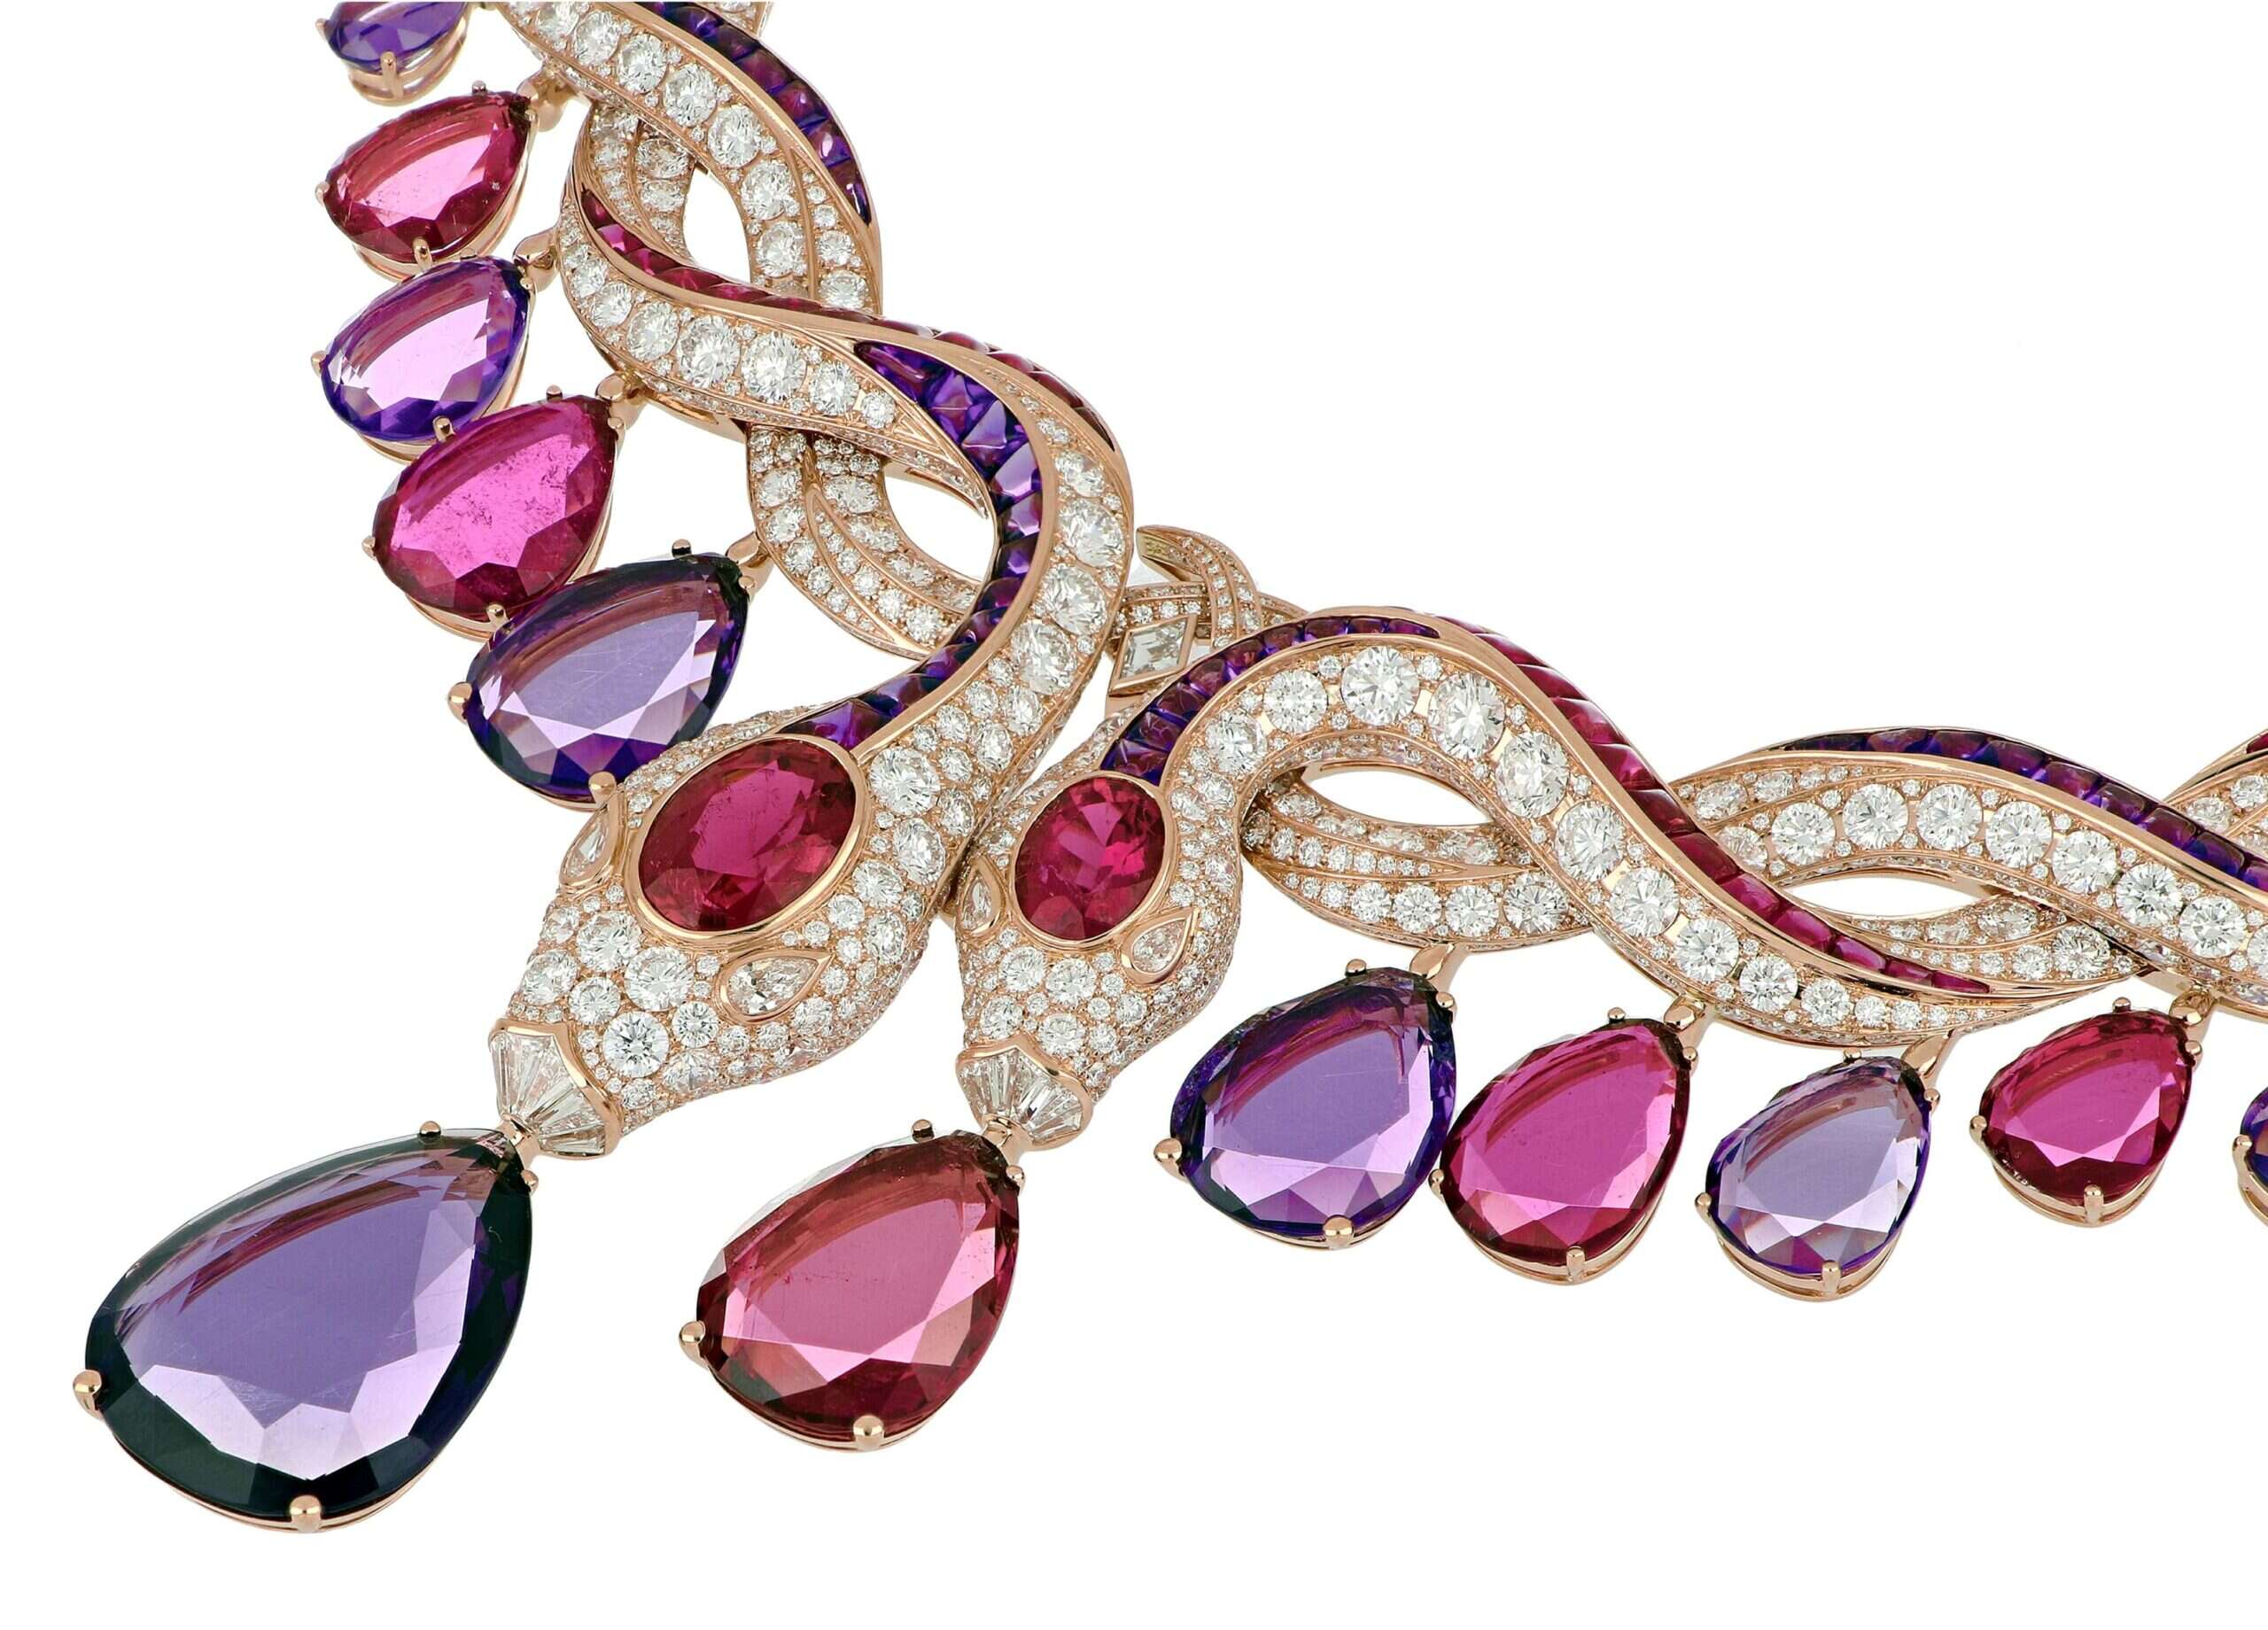 The Case for Why We Need High Jewelry - History of Haute Joaillerie